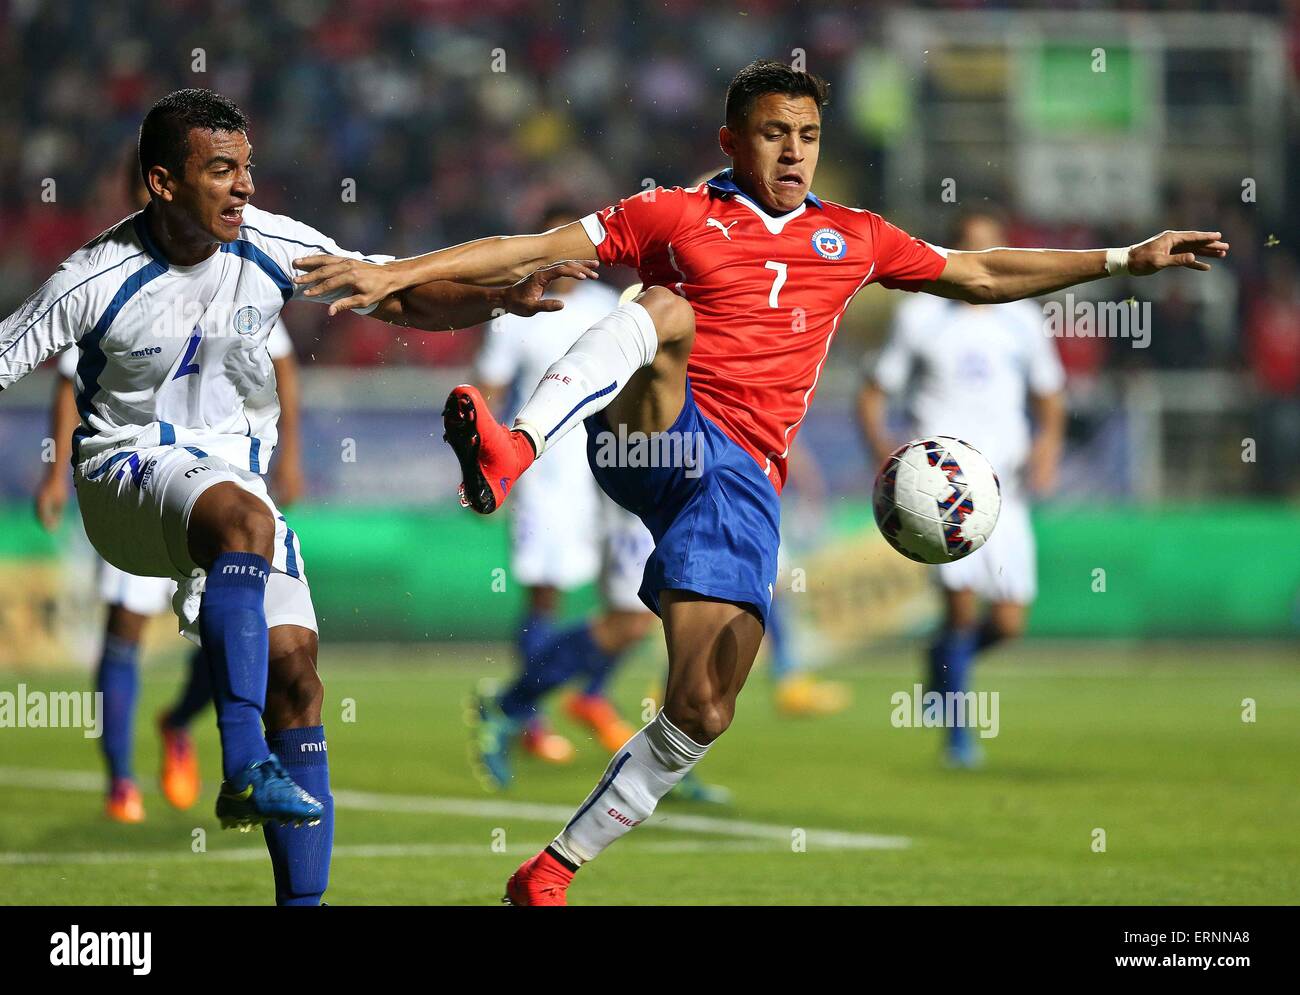 Rancagua, Chile. 5th June, 2015. Image provided by Chile's National Association of Professional Soccer (ANFP) shows Chile's Alexis Sanchez (R) vying with El Salvador's Xavier Garcia during a friendly match at the El Teniente Stadium in Rancagua, Chile, on June 5, 2015. Credit:  ANFP/Xinhua/Alamy Live News Stock Photo